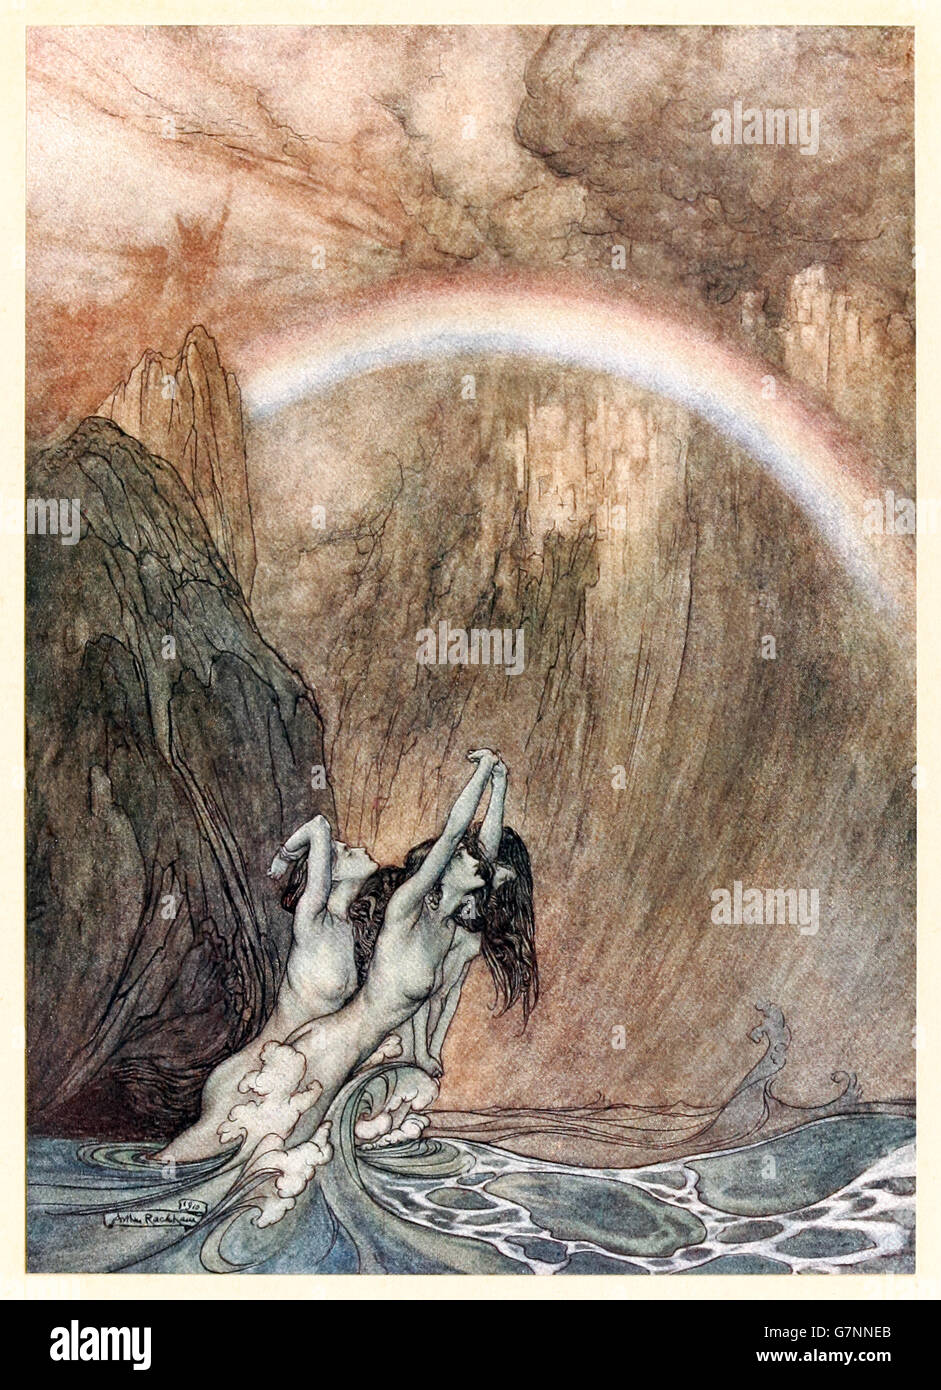 “The Rhine's fair children, bewailing their lost gold, weep.”  from ‘The Rhinegold & the Valkyrie’ illustrated by Arthur Rackham (1867-1939), published in 1910. The Rhinemaidens watch as the gods cross the rainbow bridge into Valhalla. Stock Photo